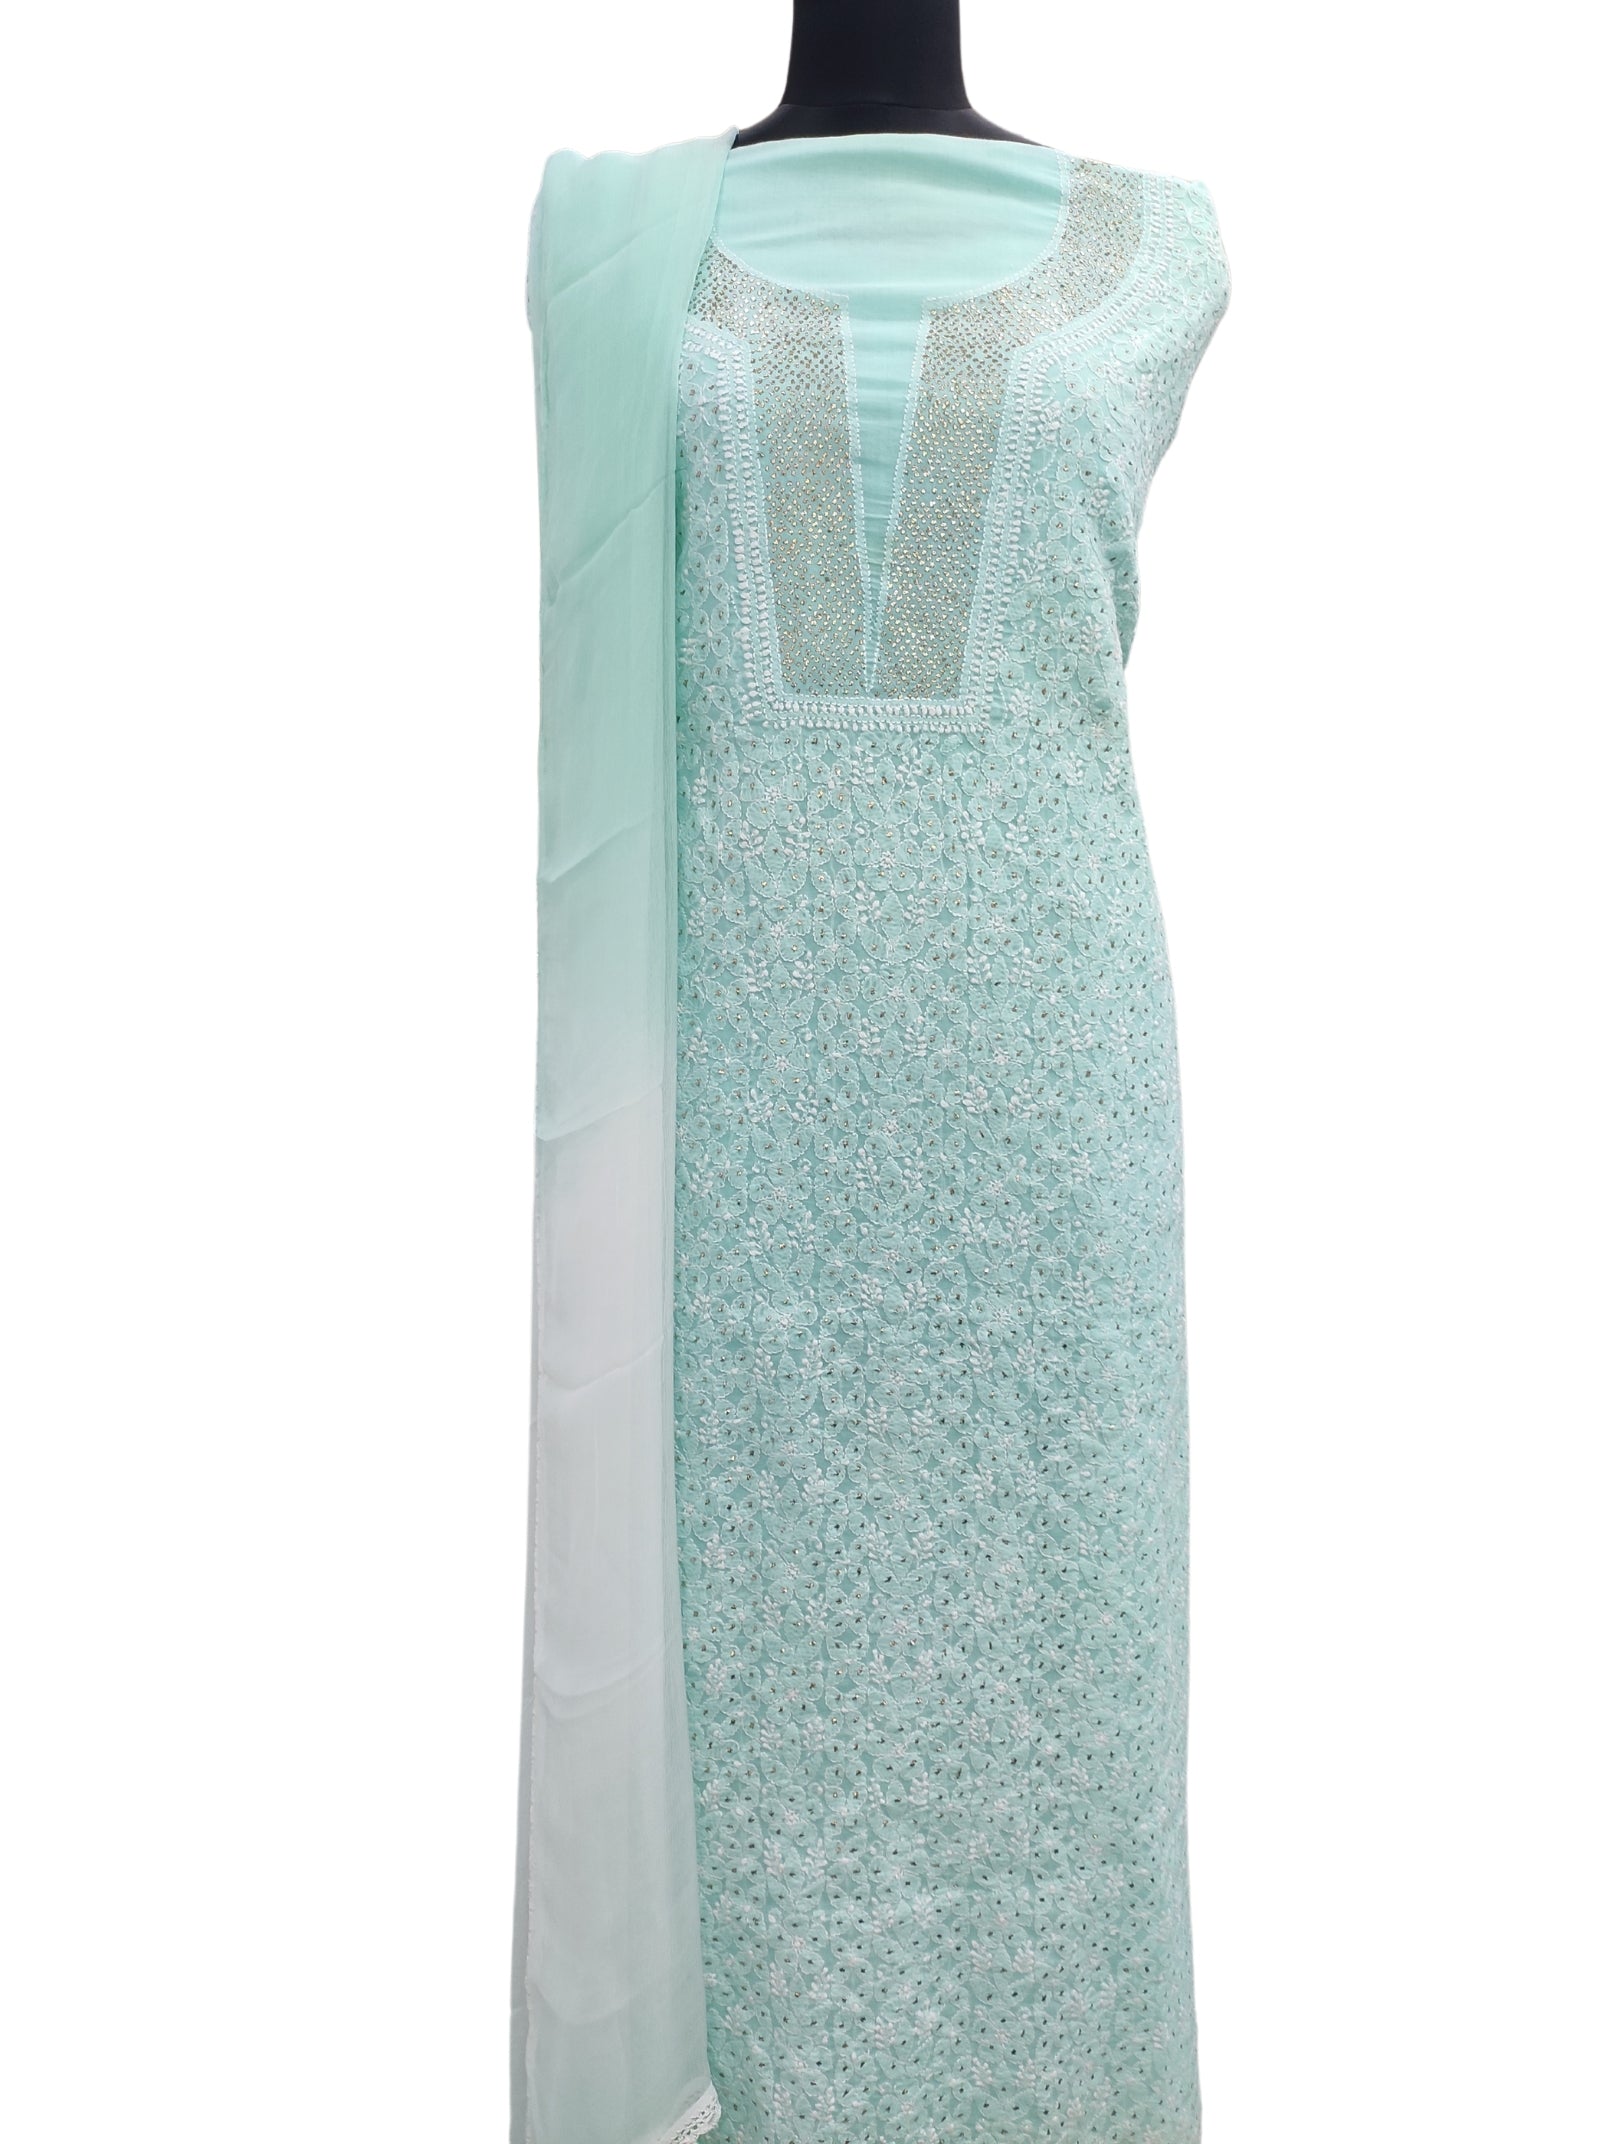 Shyamal Chikan Hand Embroidered Sea Green Cotton Lucknowi Chikankari Unstitched Suit Piece With Mukaish Work - S12198